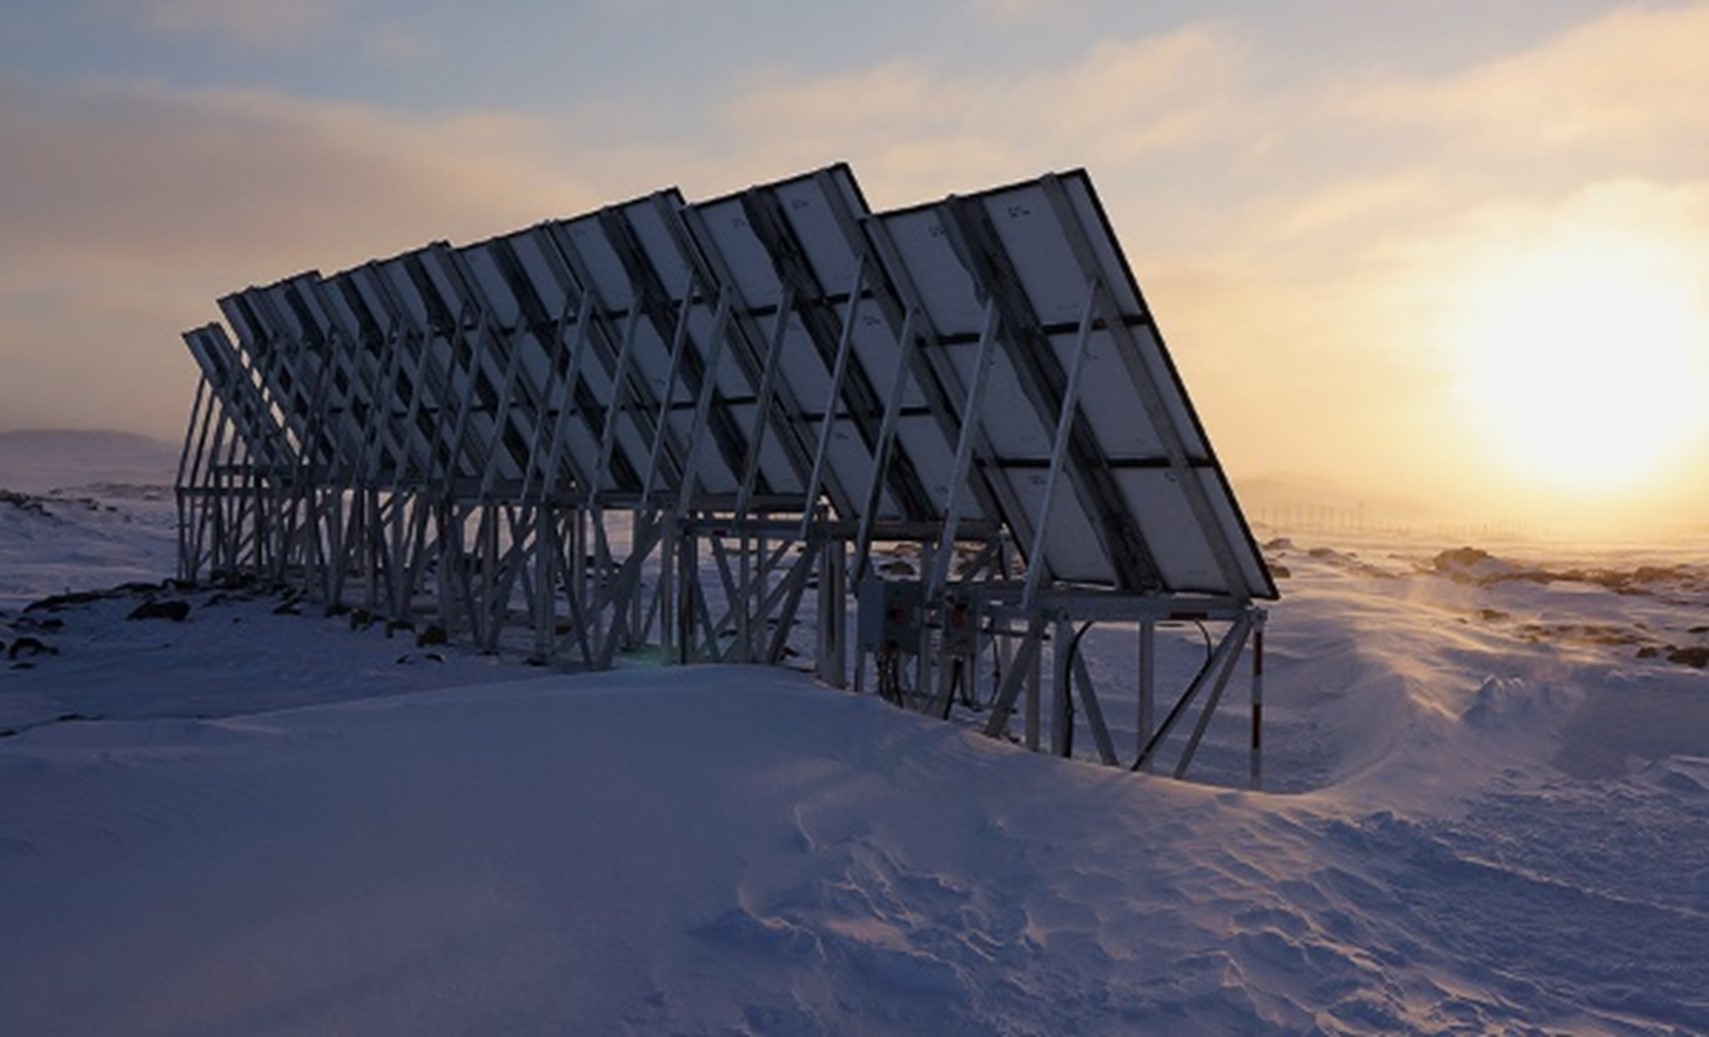 modular structures supporting the solar panels